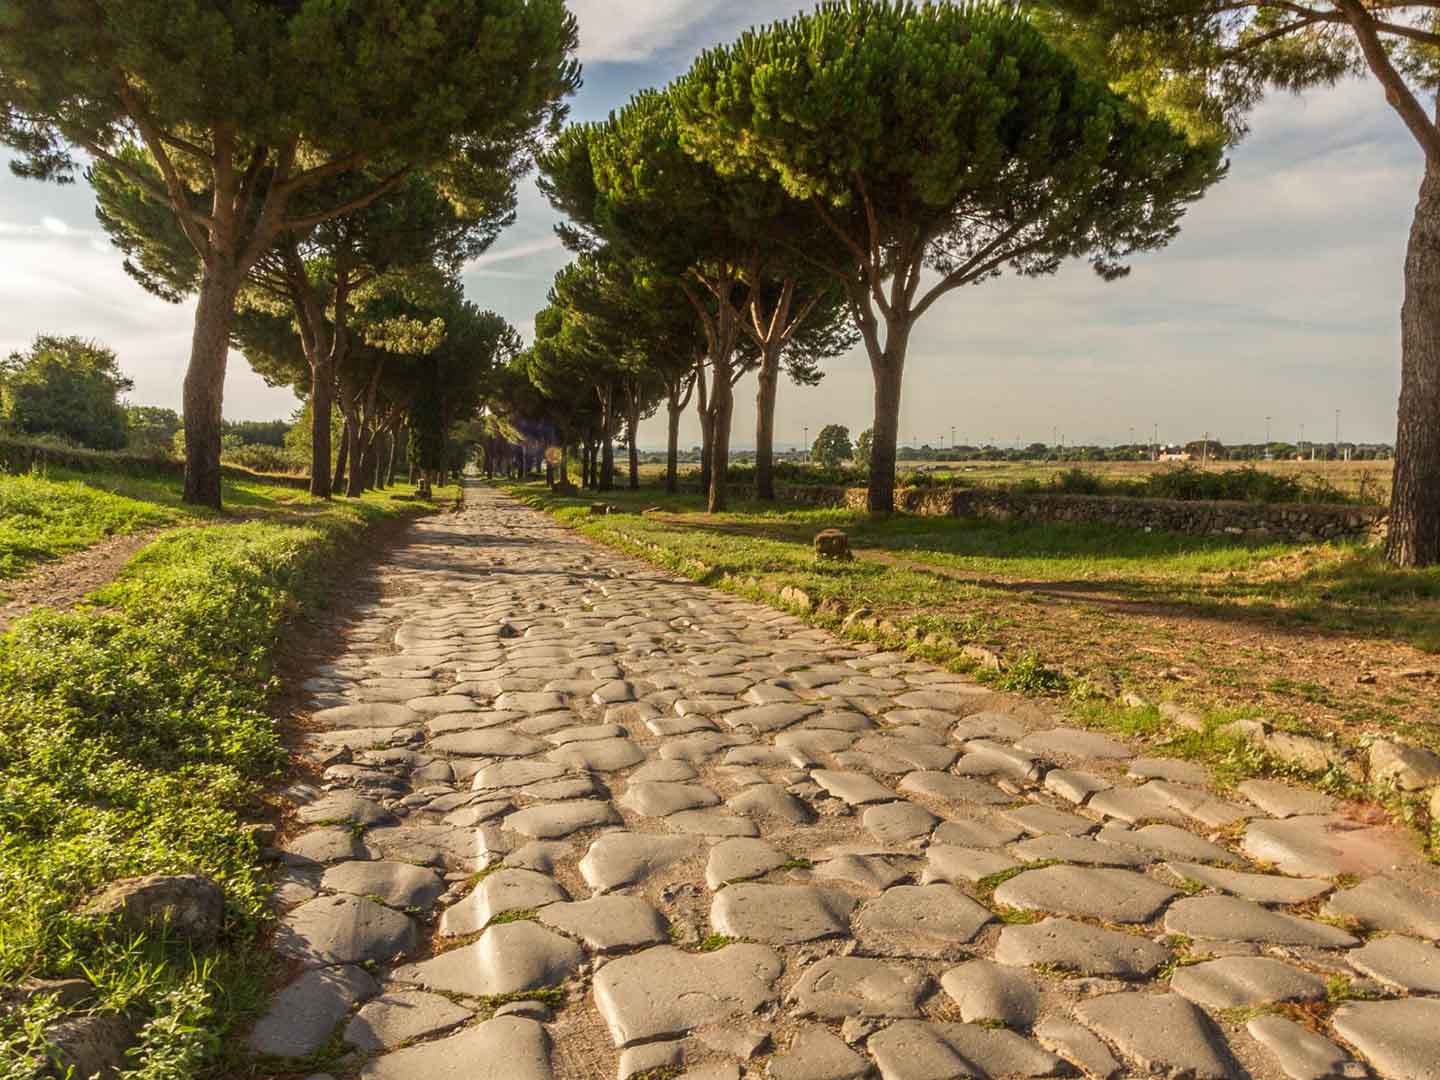 Why Do All Roads Come to Rome?